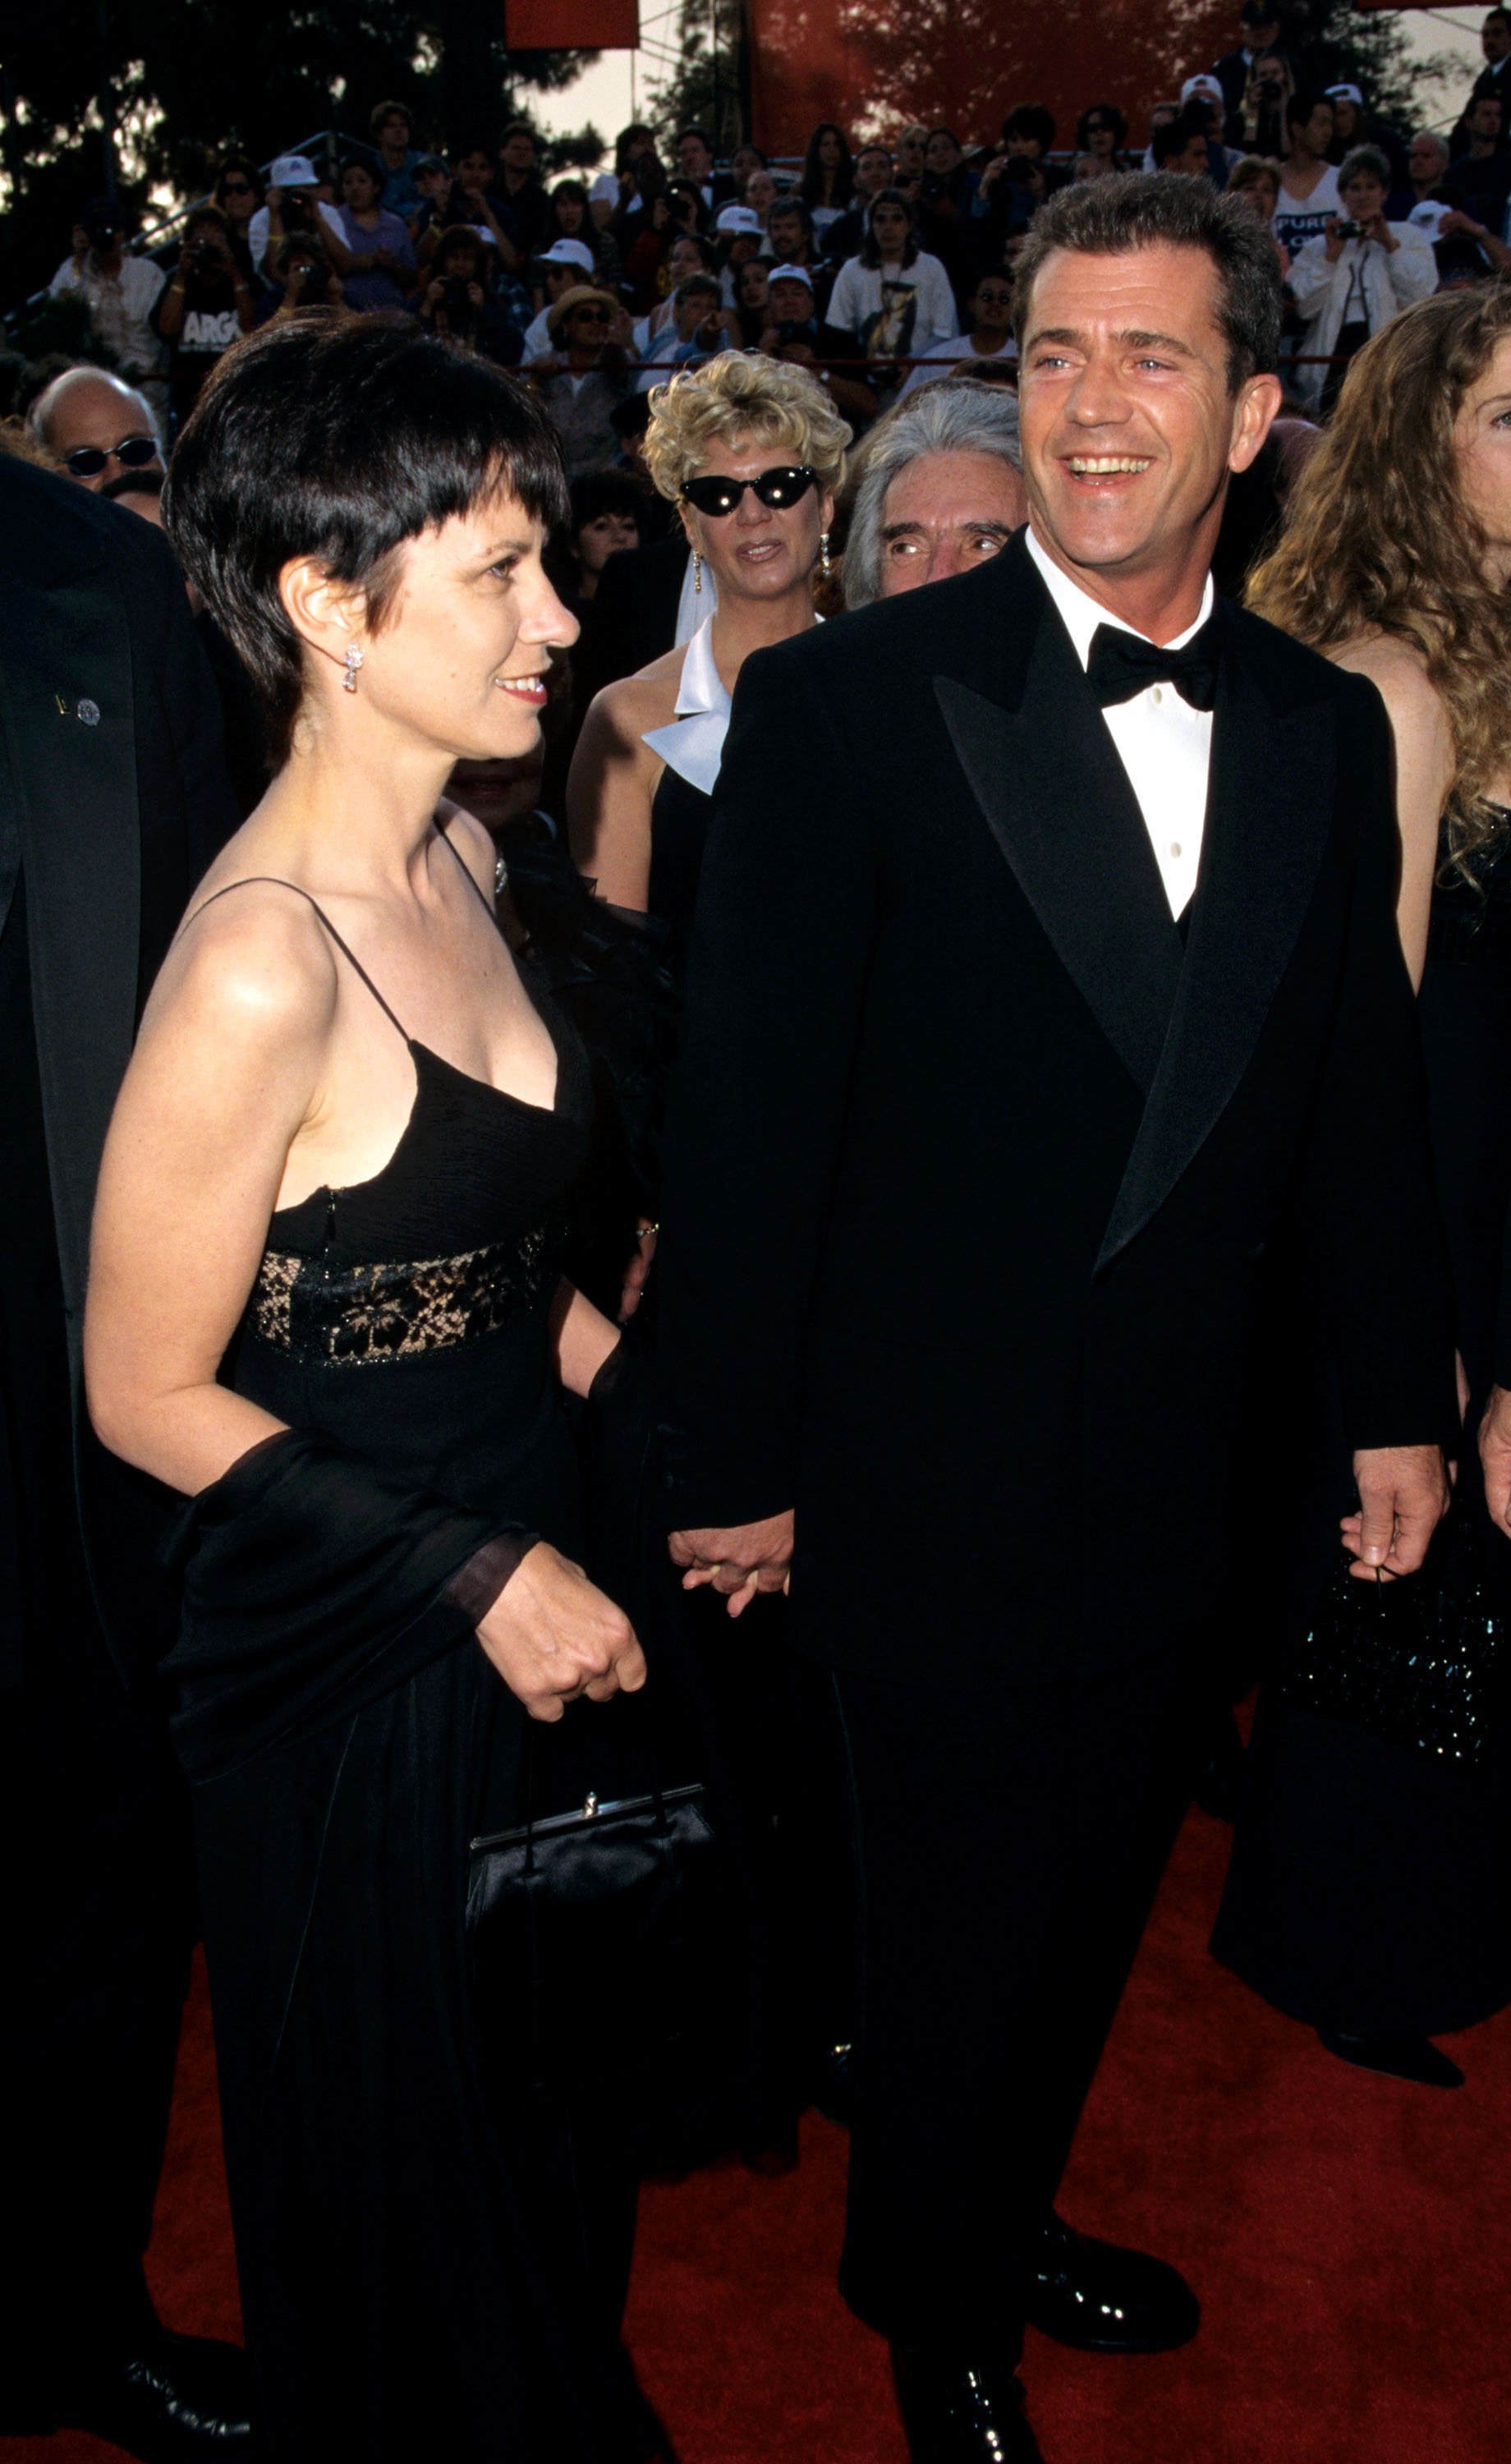 Mel Gibson and wife Robyn Gibson during The 69th Annual Academy Awards at Shrine Auditorium in Los Angeles, California. / Source: Getty Images